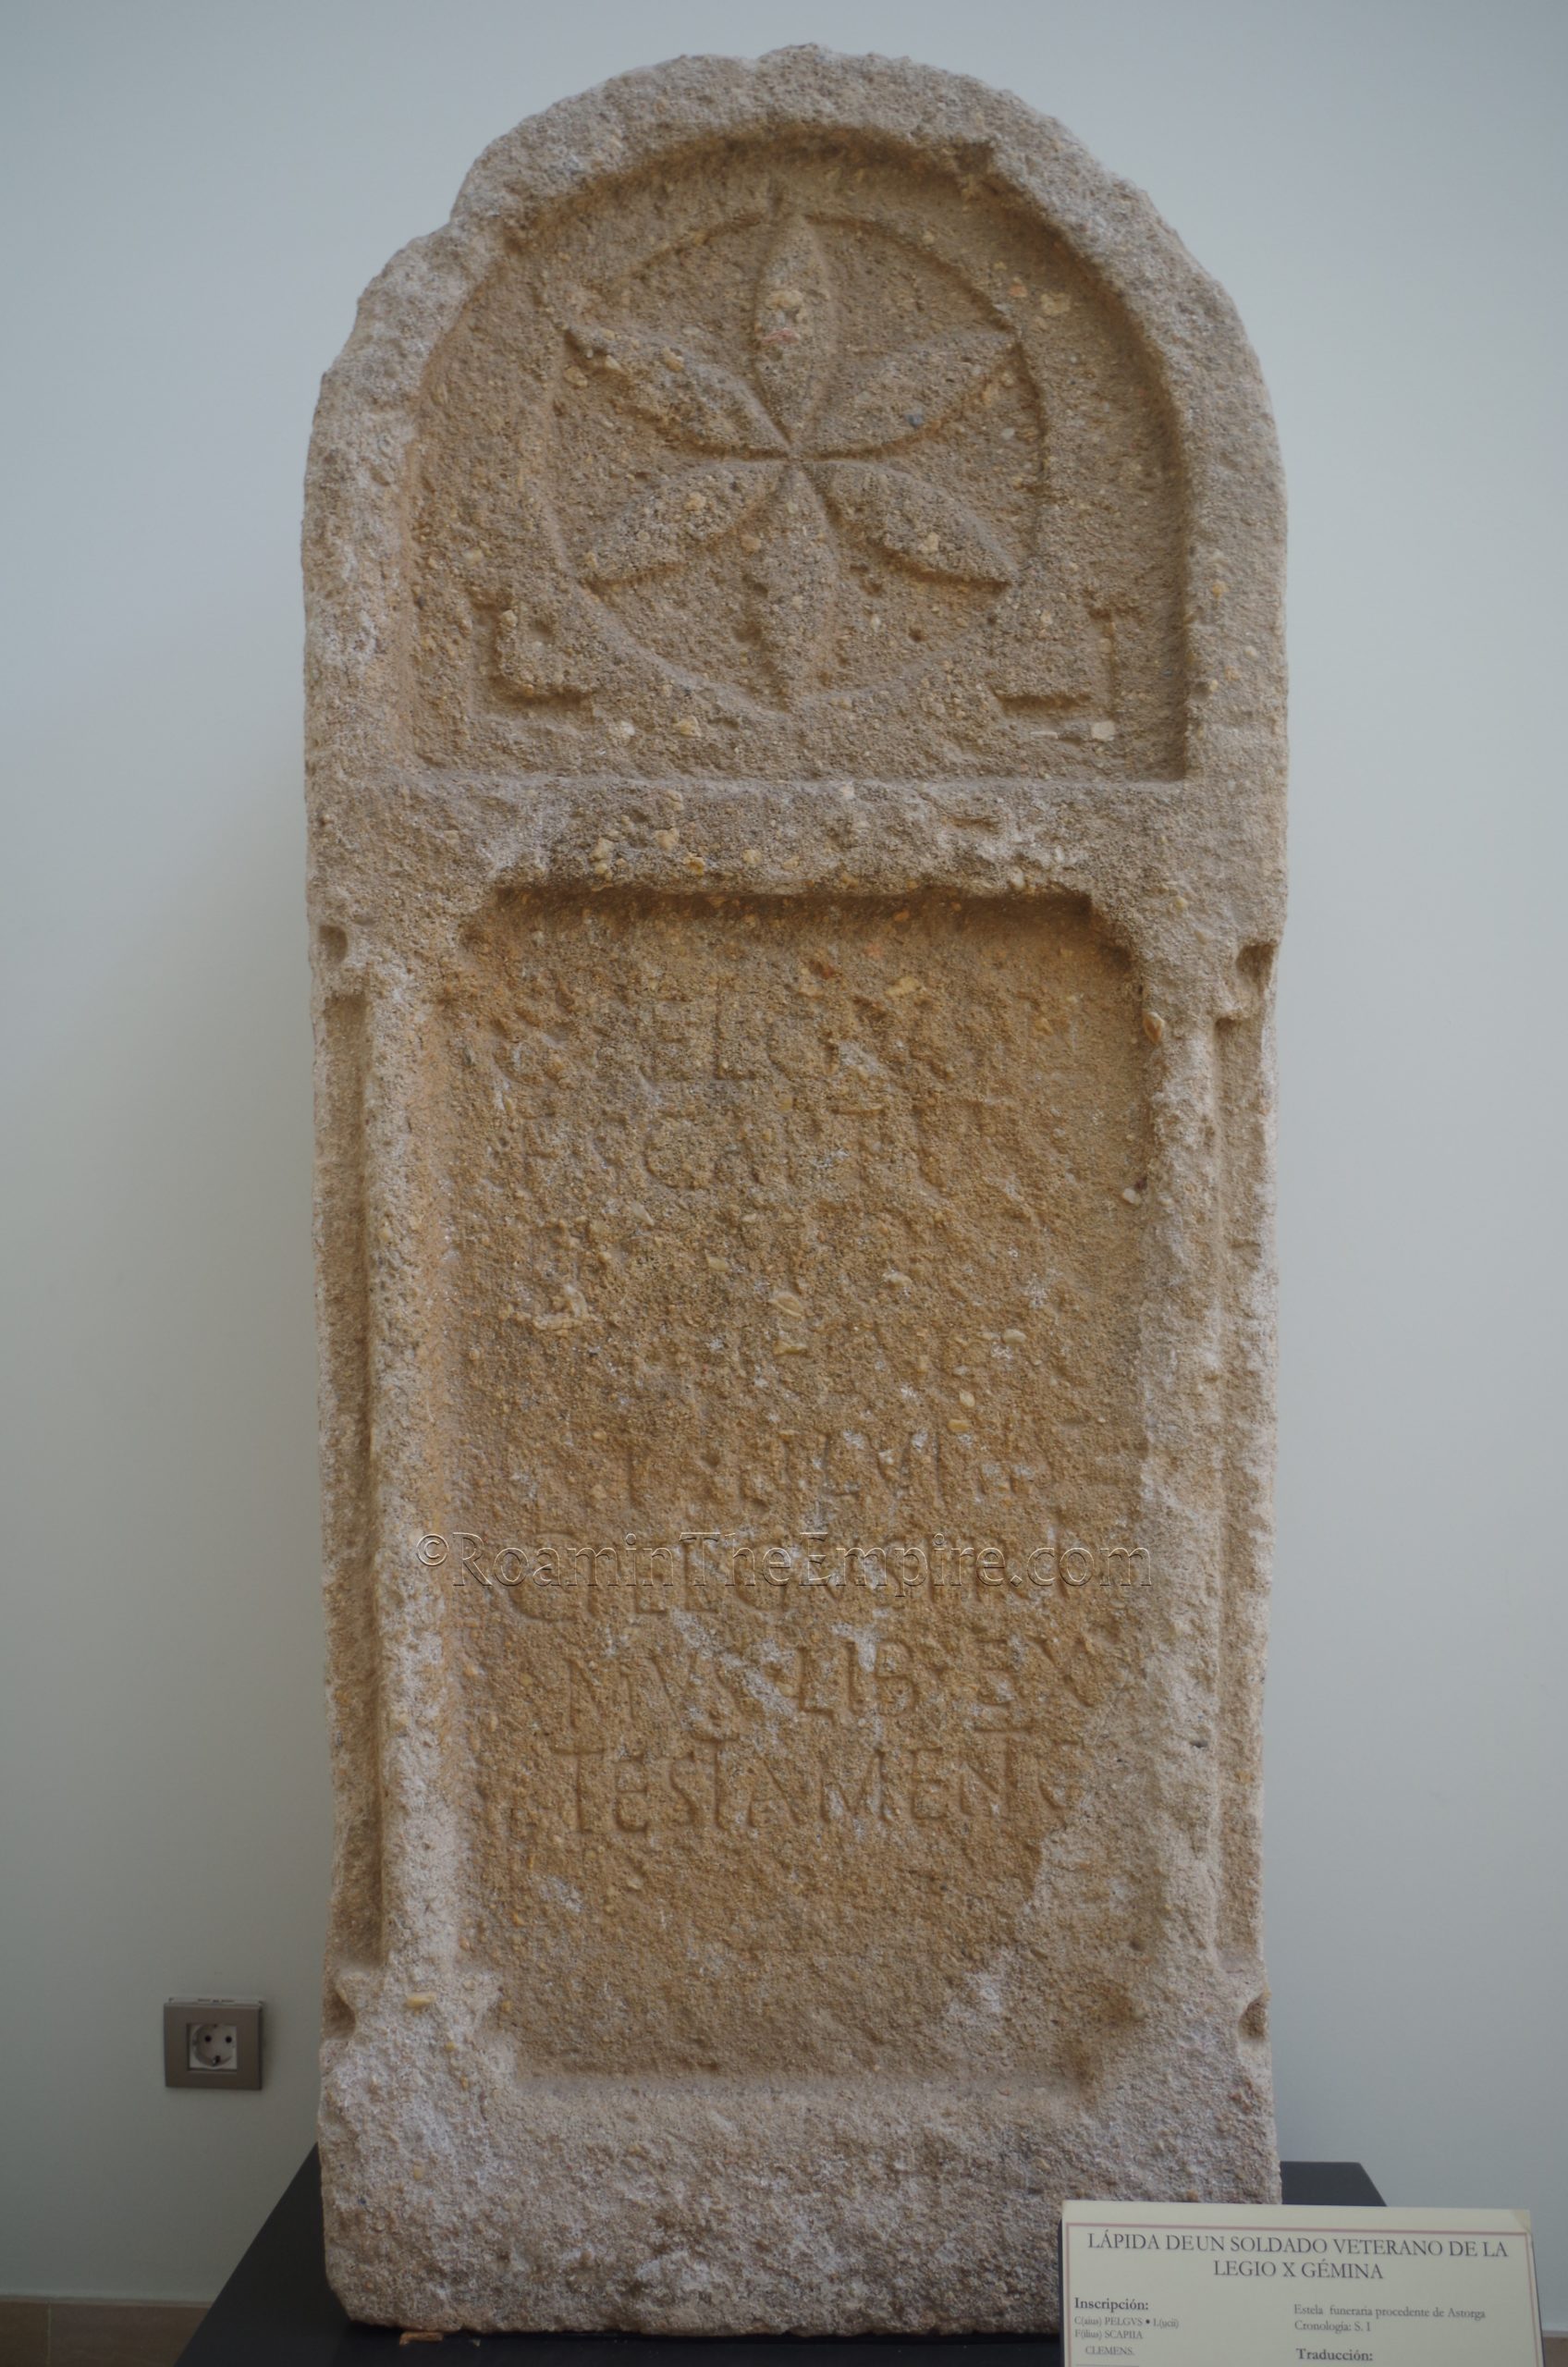 Funerary stele of the Cornicen Lucius Octavius Magio, son of Lucius. He was a native of Baeterrae Septimanorum (Béziers, France) and member of the Pupina tribe. A veteran of Legio X Gemina, in the century of Titus Numisio. Dated to the 1st century CE. Museo Romano La Ergastula.